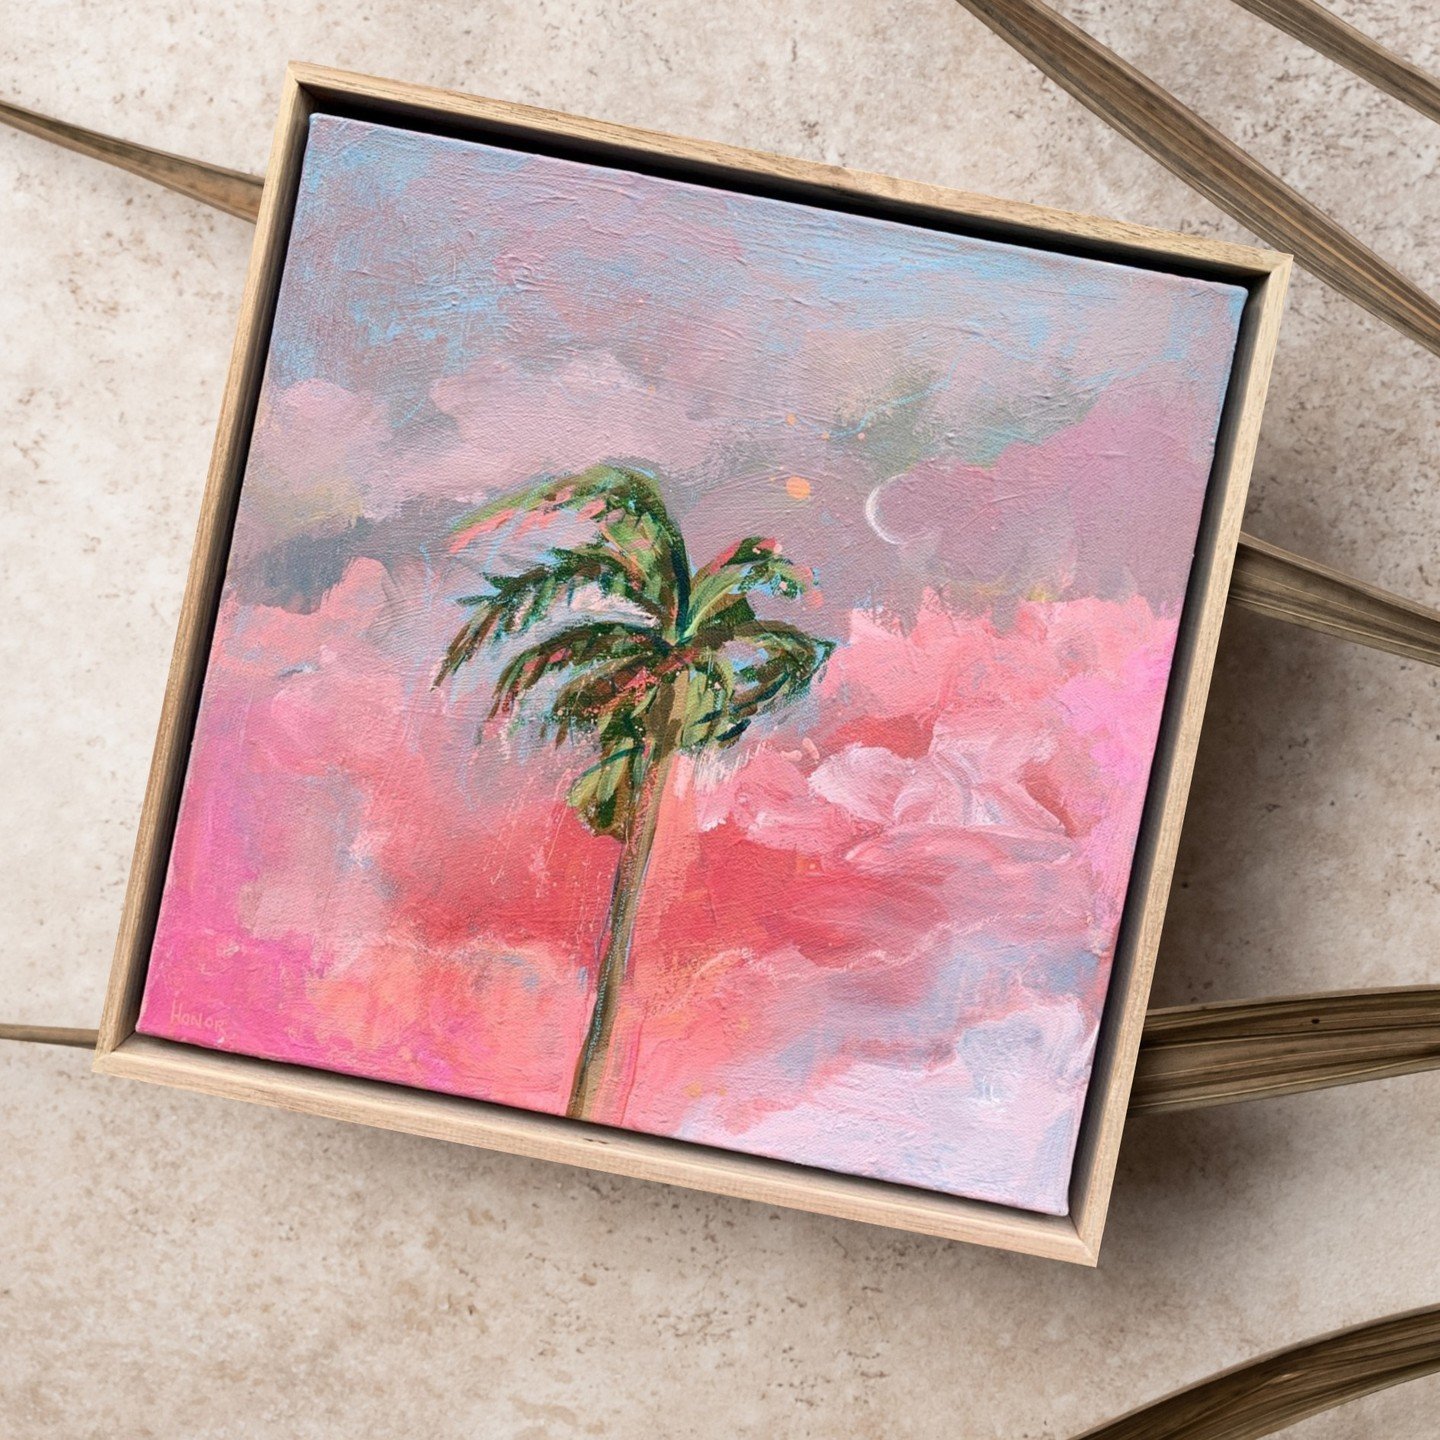 S U M M E R D R E A M S

Punchy pinks and cool blue hues - what summer dreams are made of 🌴💖✨

Available via @arttoart_ and at the @affordableartfairau next month 🙌🏼

♡ Honor

The Last Fruit Tingle
33 x 33 cm framed in oak
$420

.

#honorbowdenar